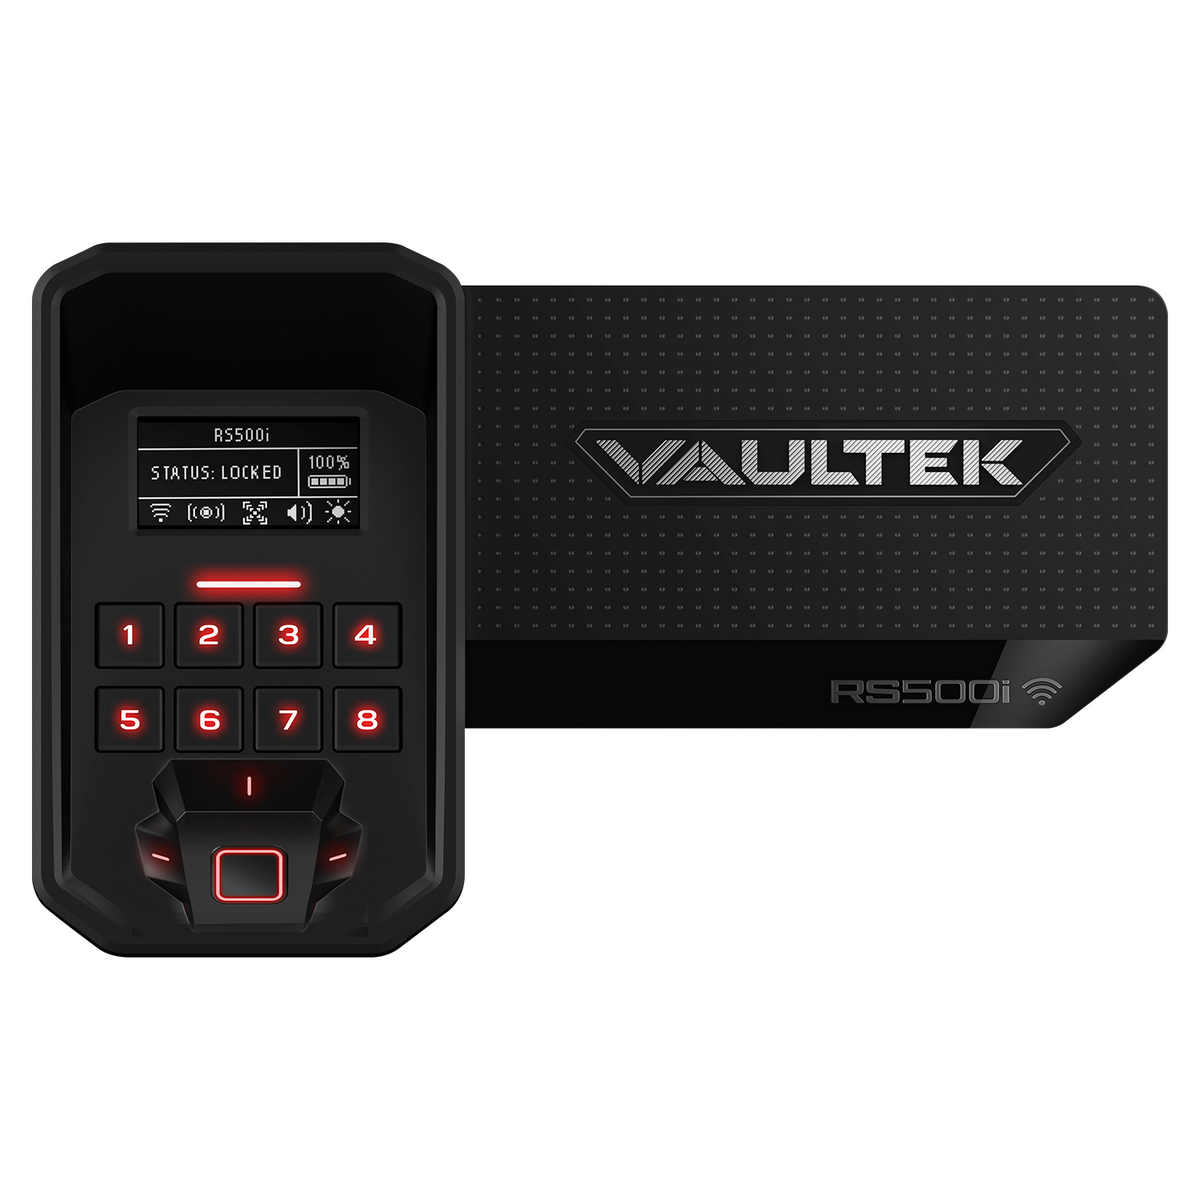 Vaultek -  RS500i Plus Edition Wi-Fi Biometric Smart Rifle Safe with Maxed Out Accessory Kit